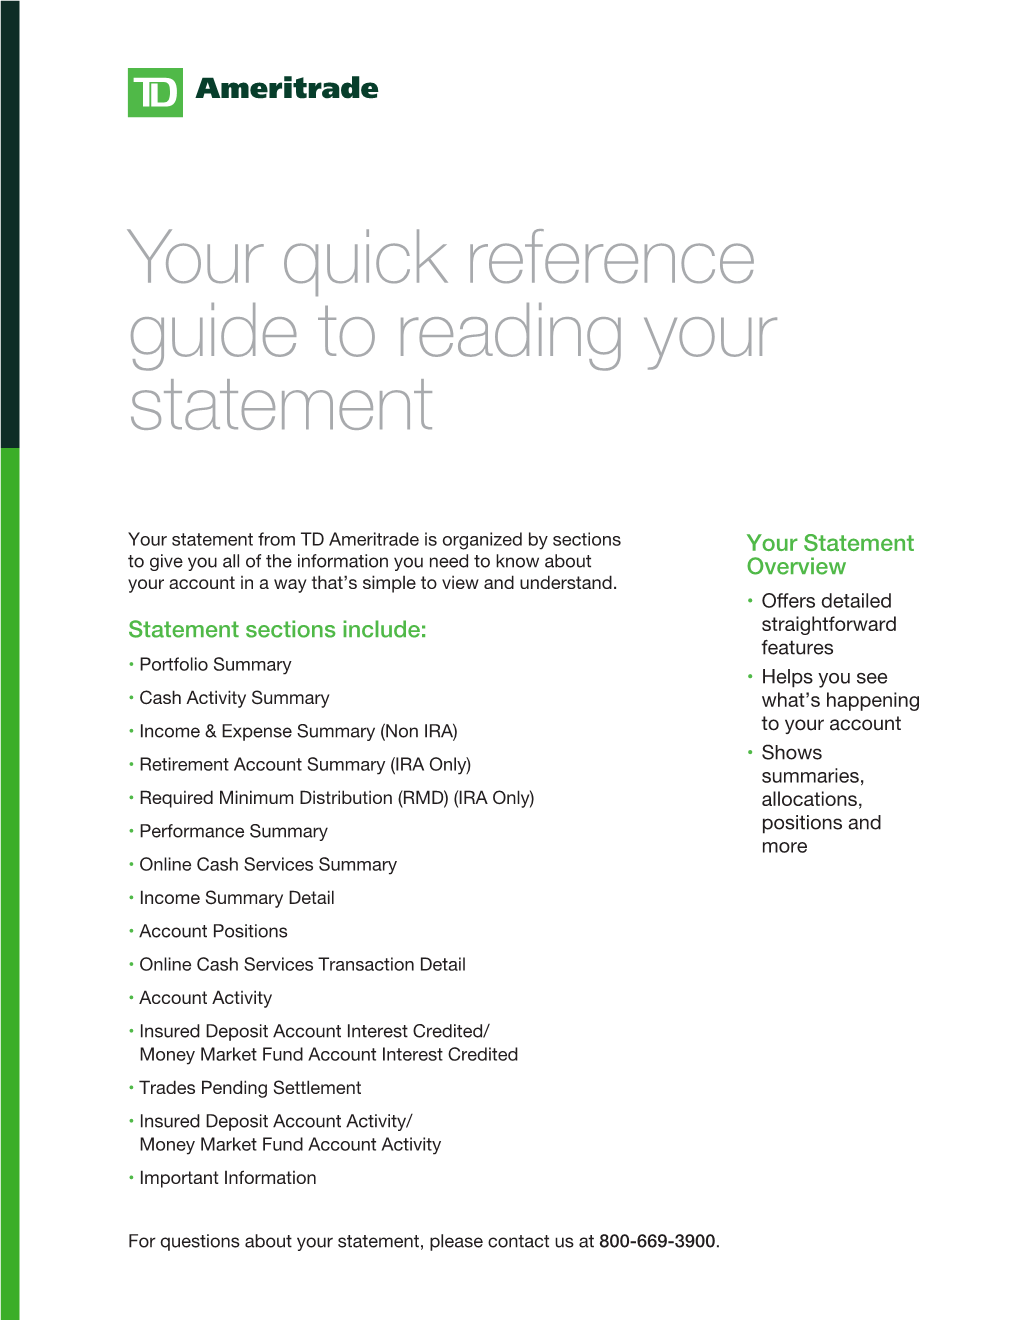 Your Quick Reference Guide to Reading Your Statement